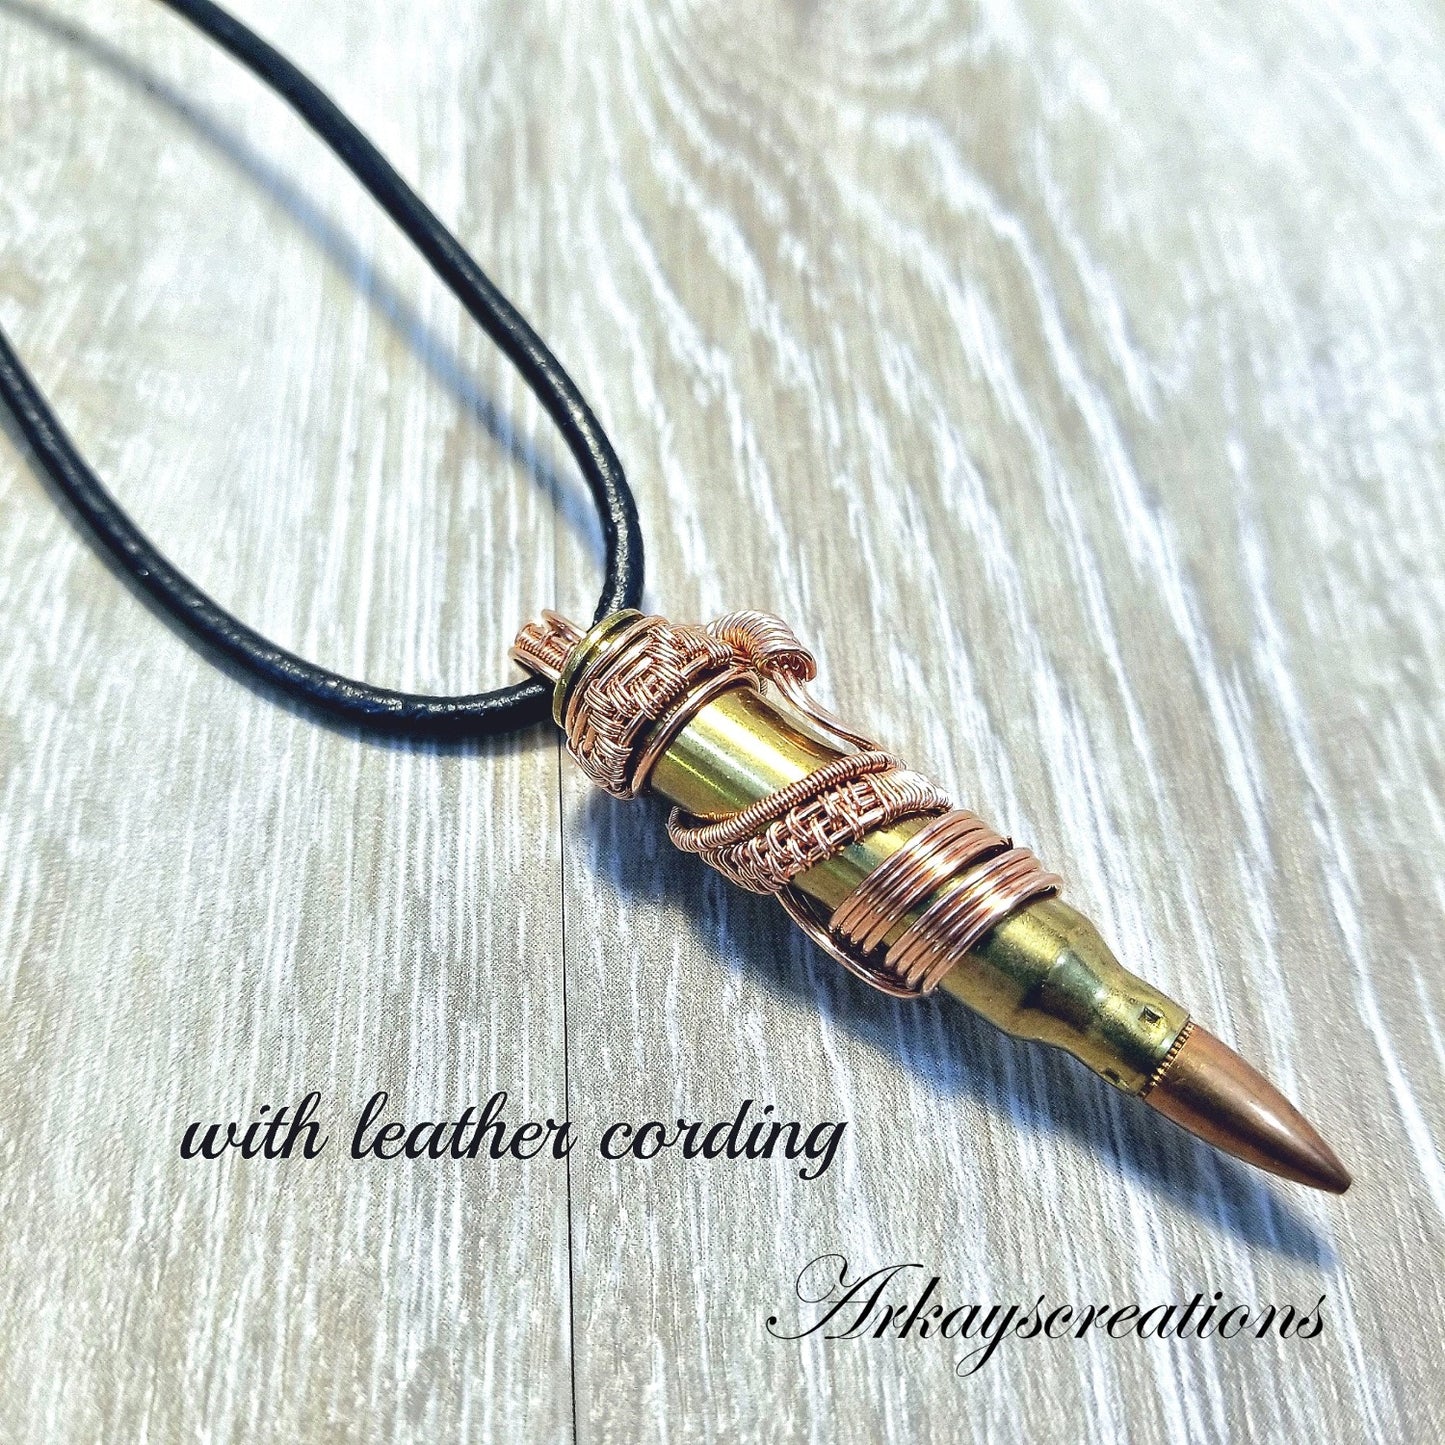 Mens Bullet Necklace, Wire Woven Bullet Pendant, Steampunk Jewelry